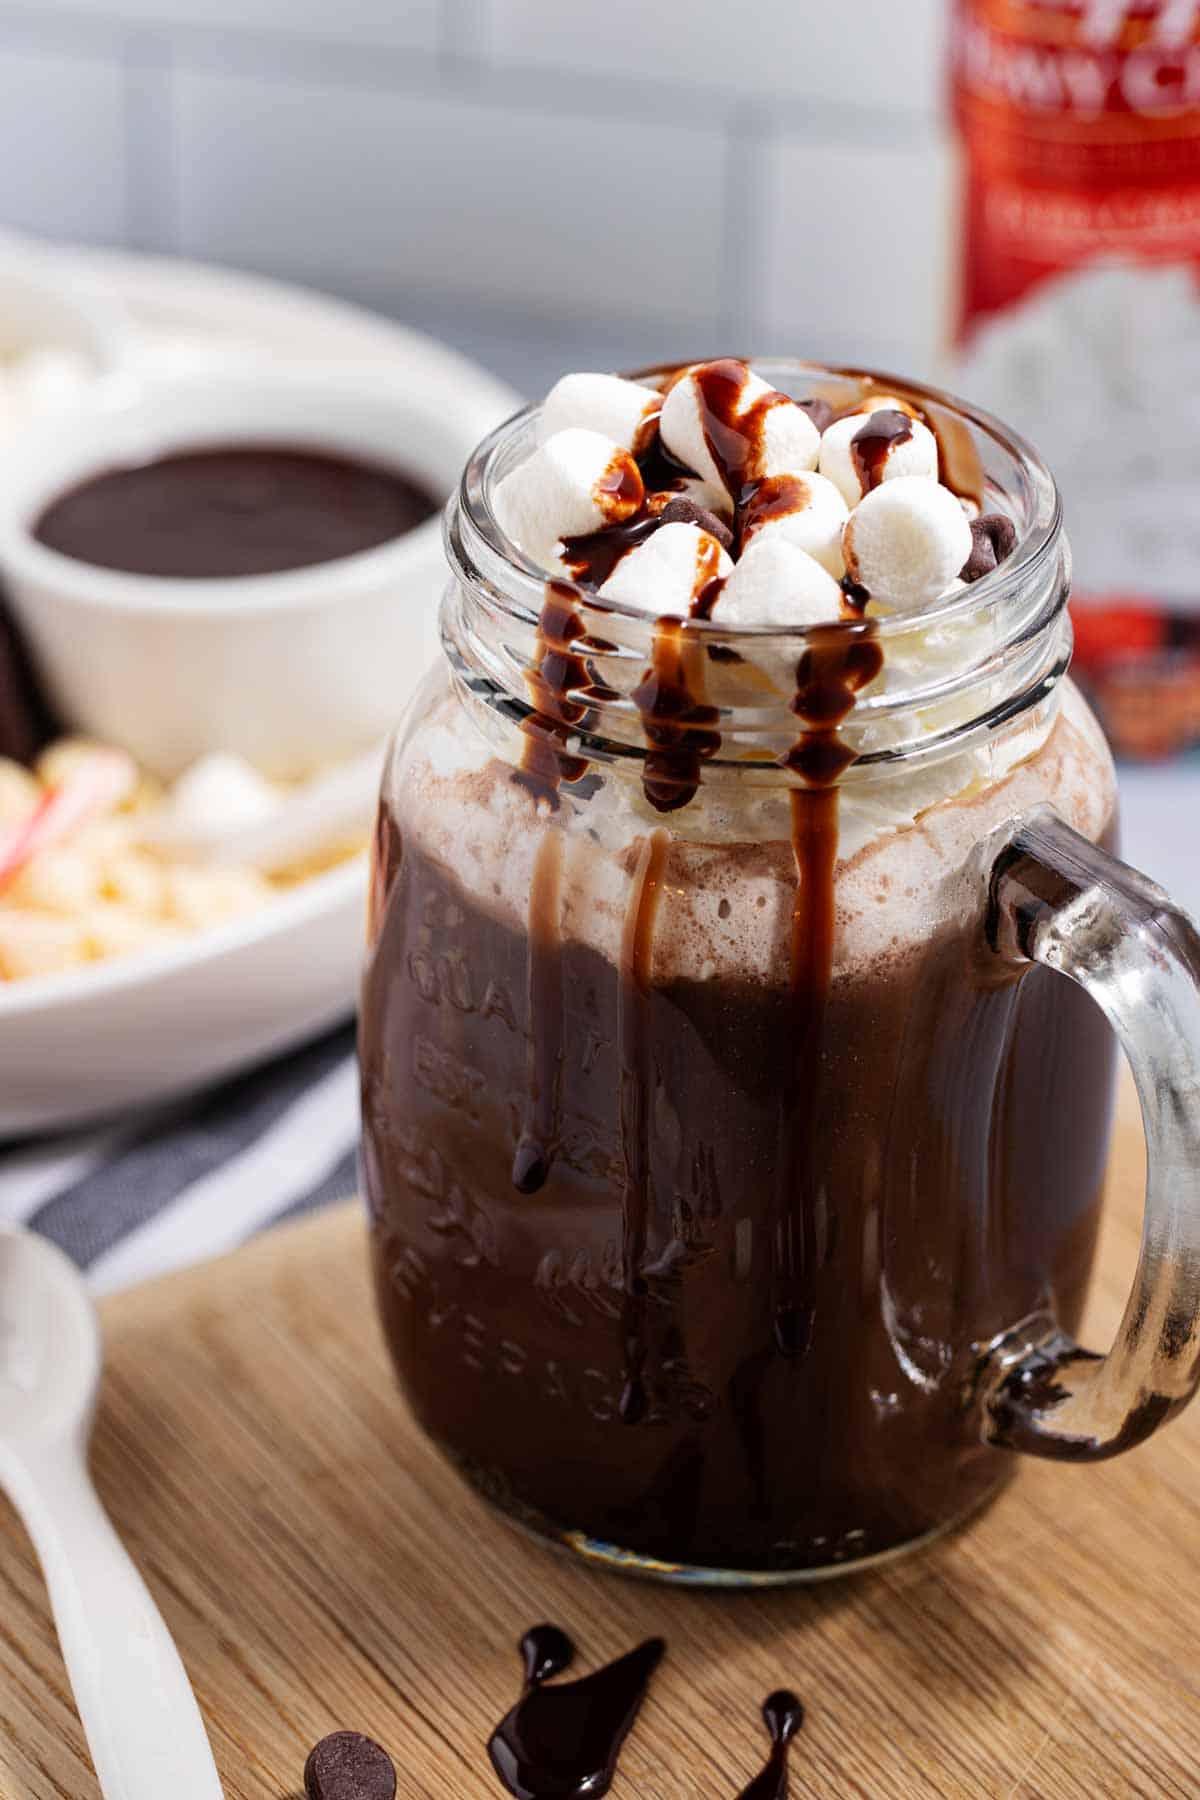 Mason jar cup filled with hot chocolate made with chocolate chips and garnished with whipped cream, marshmallows, and chocolate syrup.